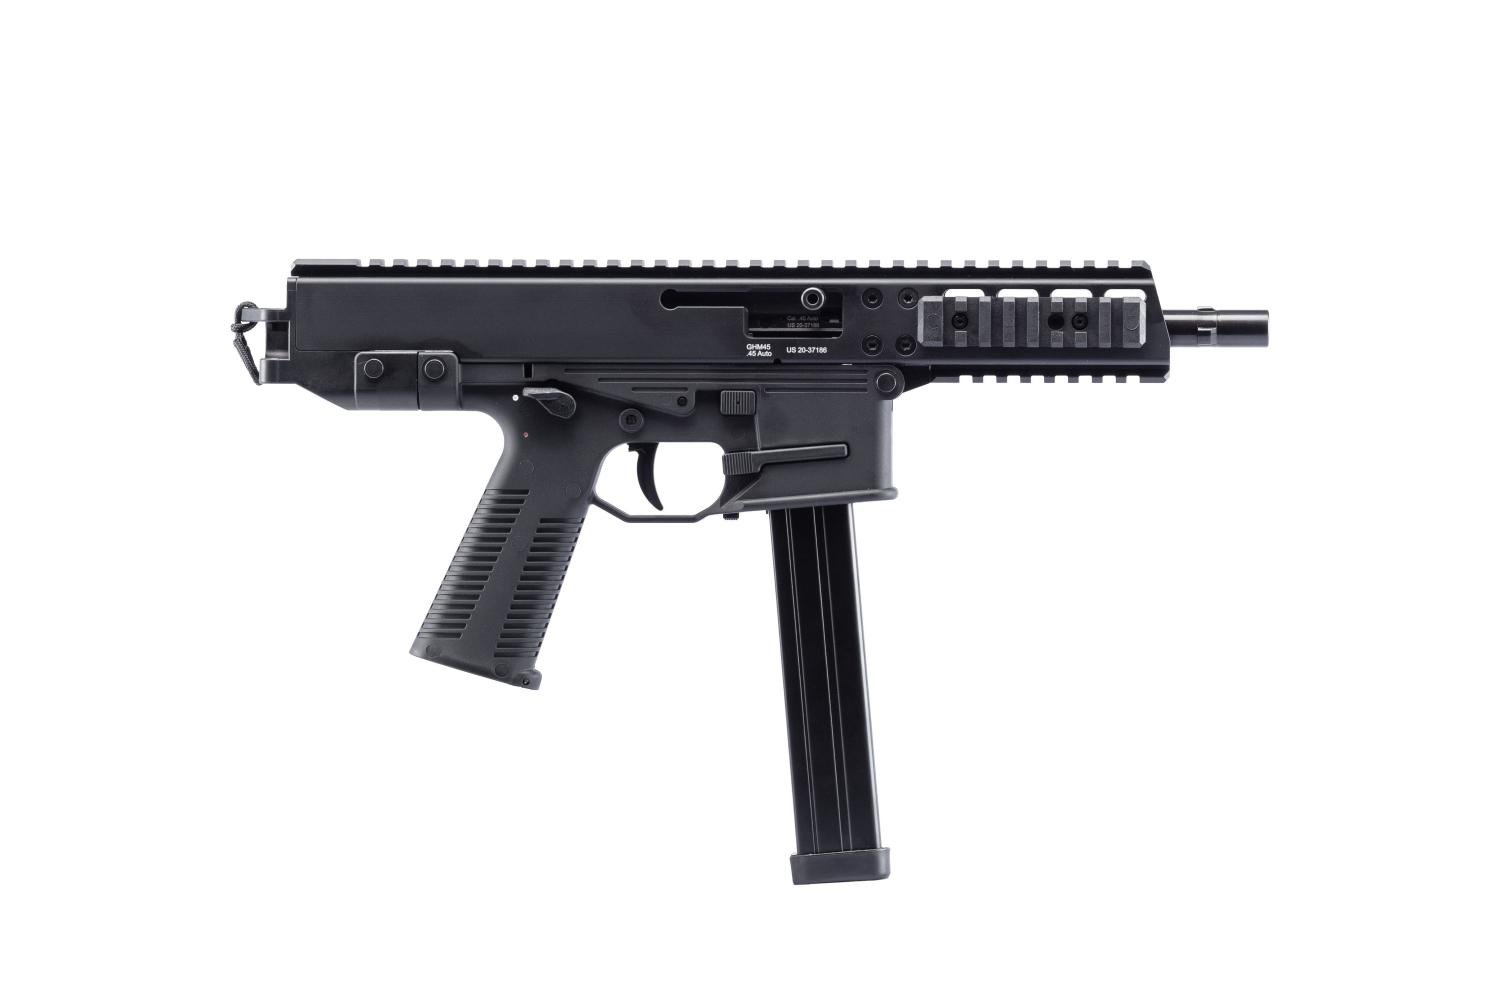 B&T USA GHM45 45 ACP 6.8in Black 25rd - $1431.99 (click the Email For Price button to get this price) (Free S/H on Firearms)